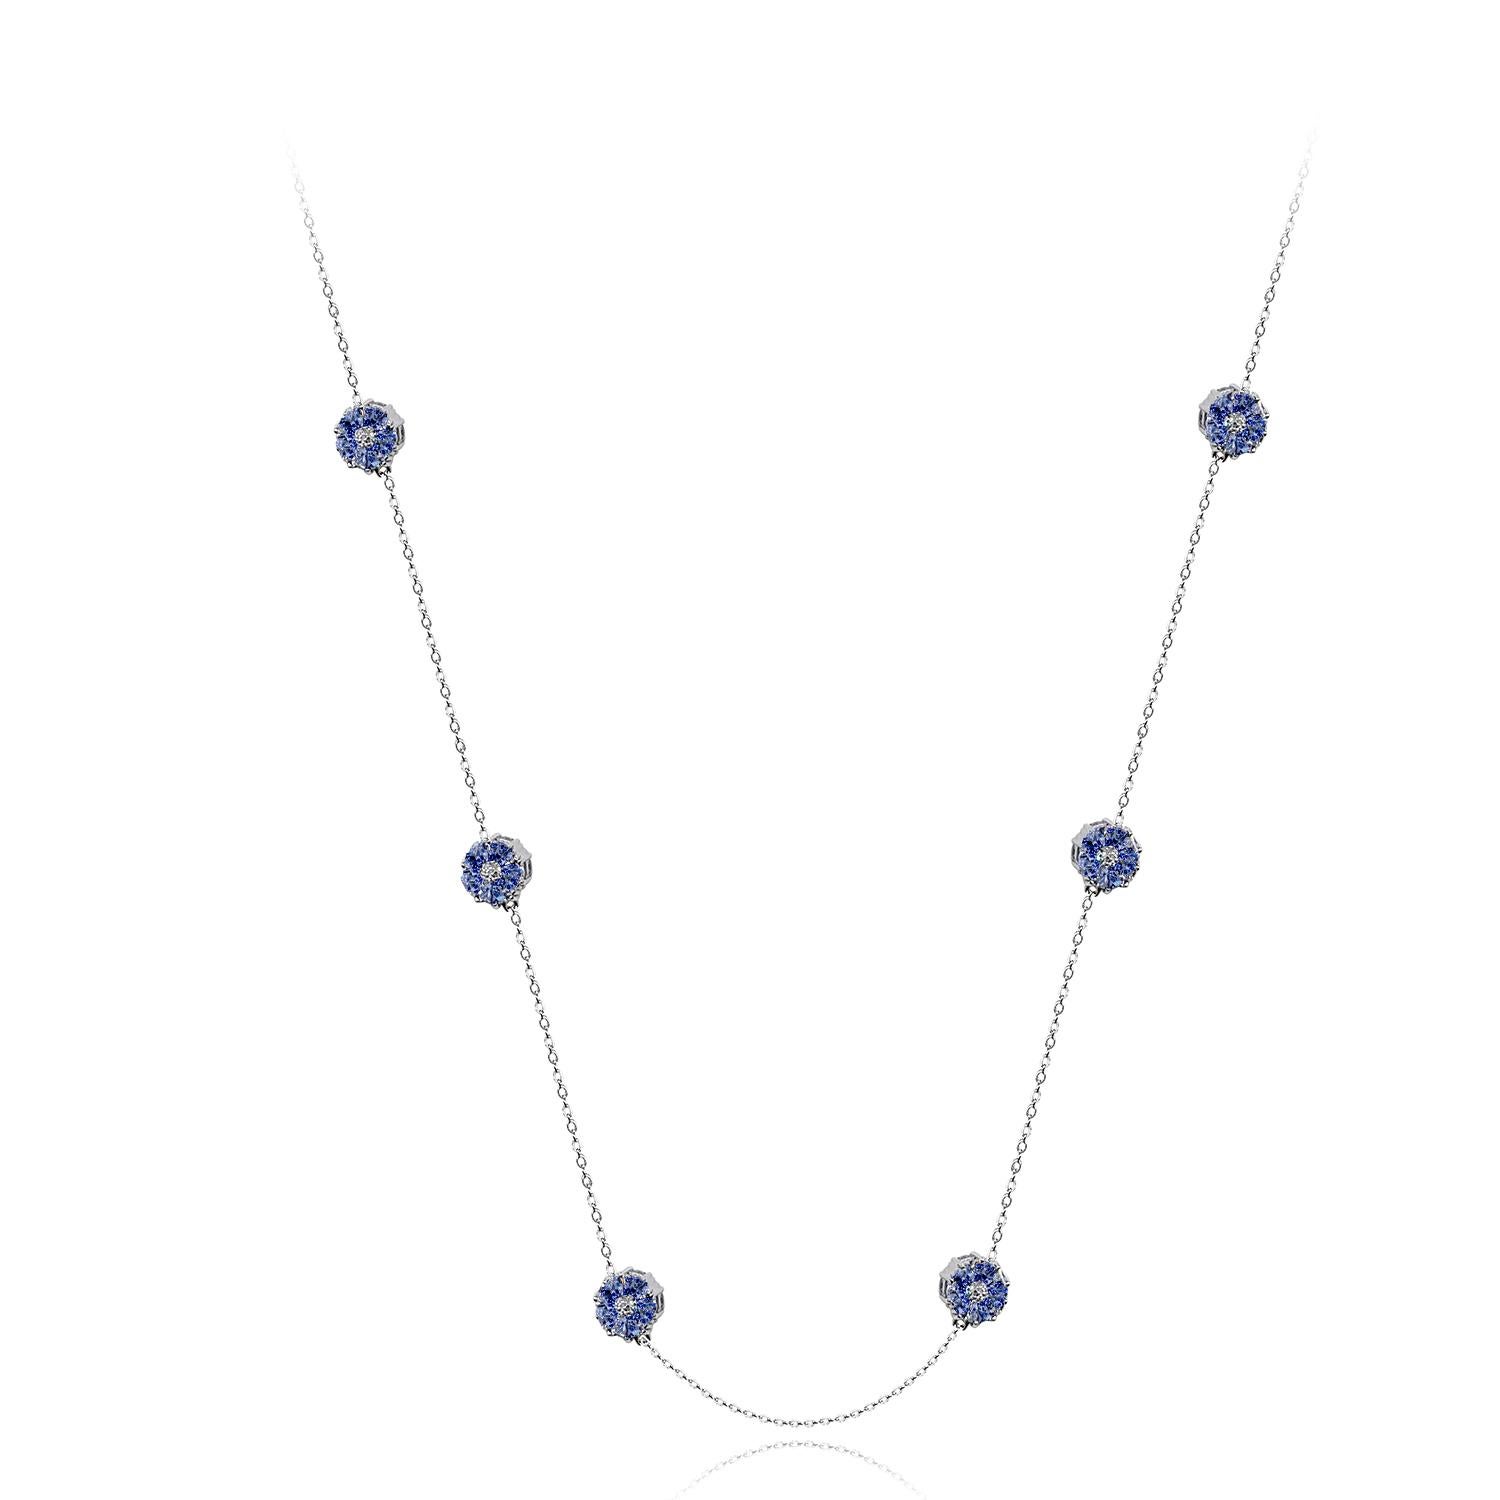 Modern Medium Doublesided Blossom Chain Necklace For Sale